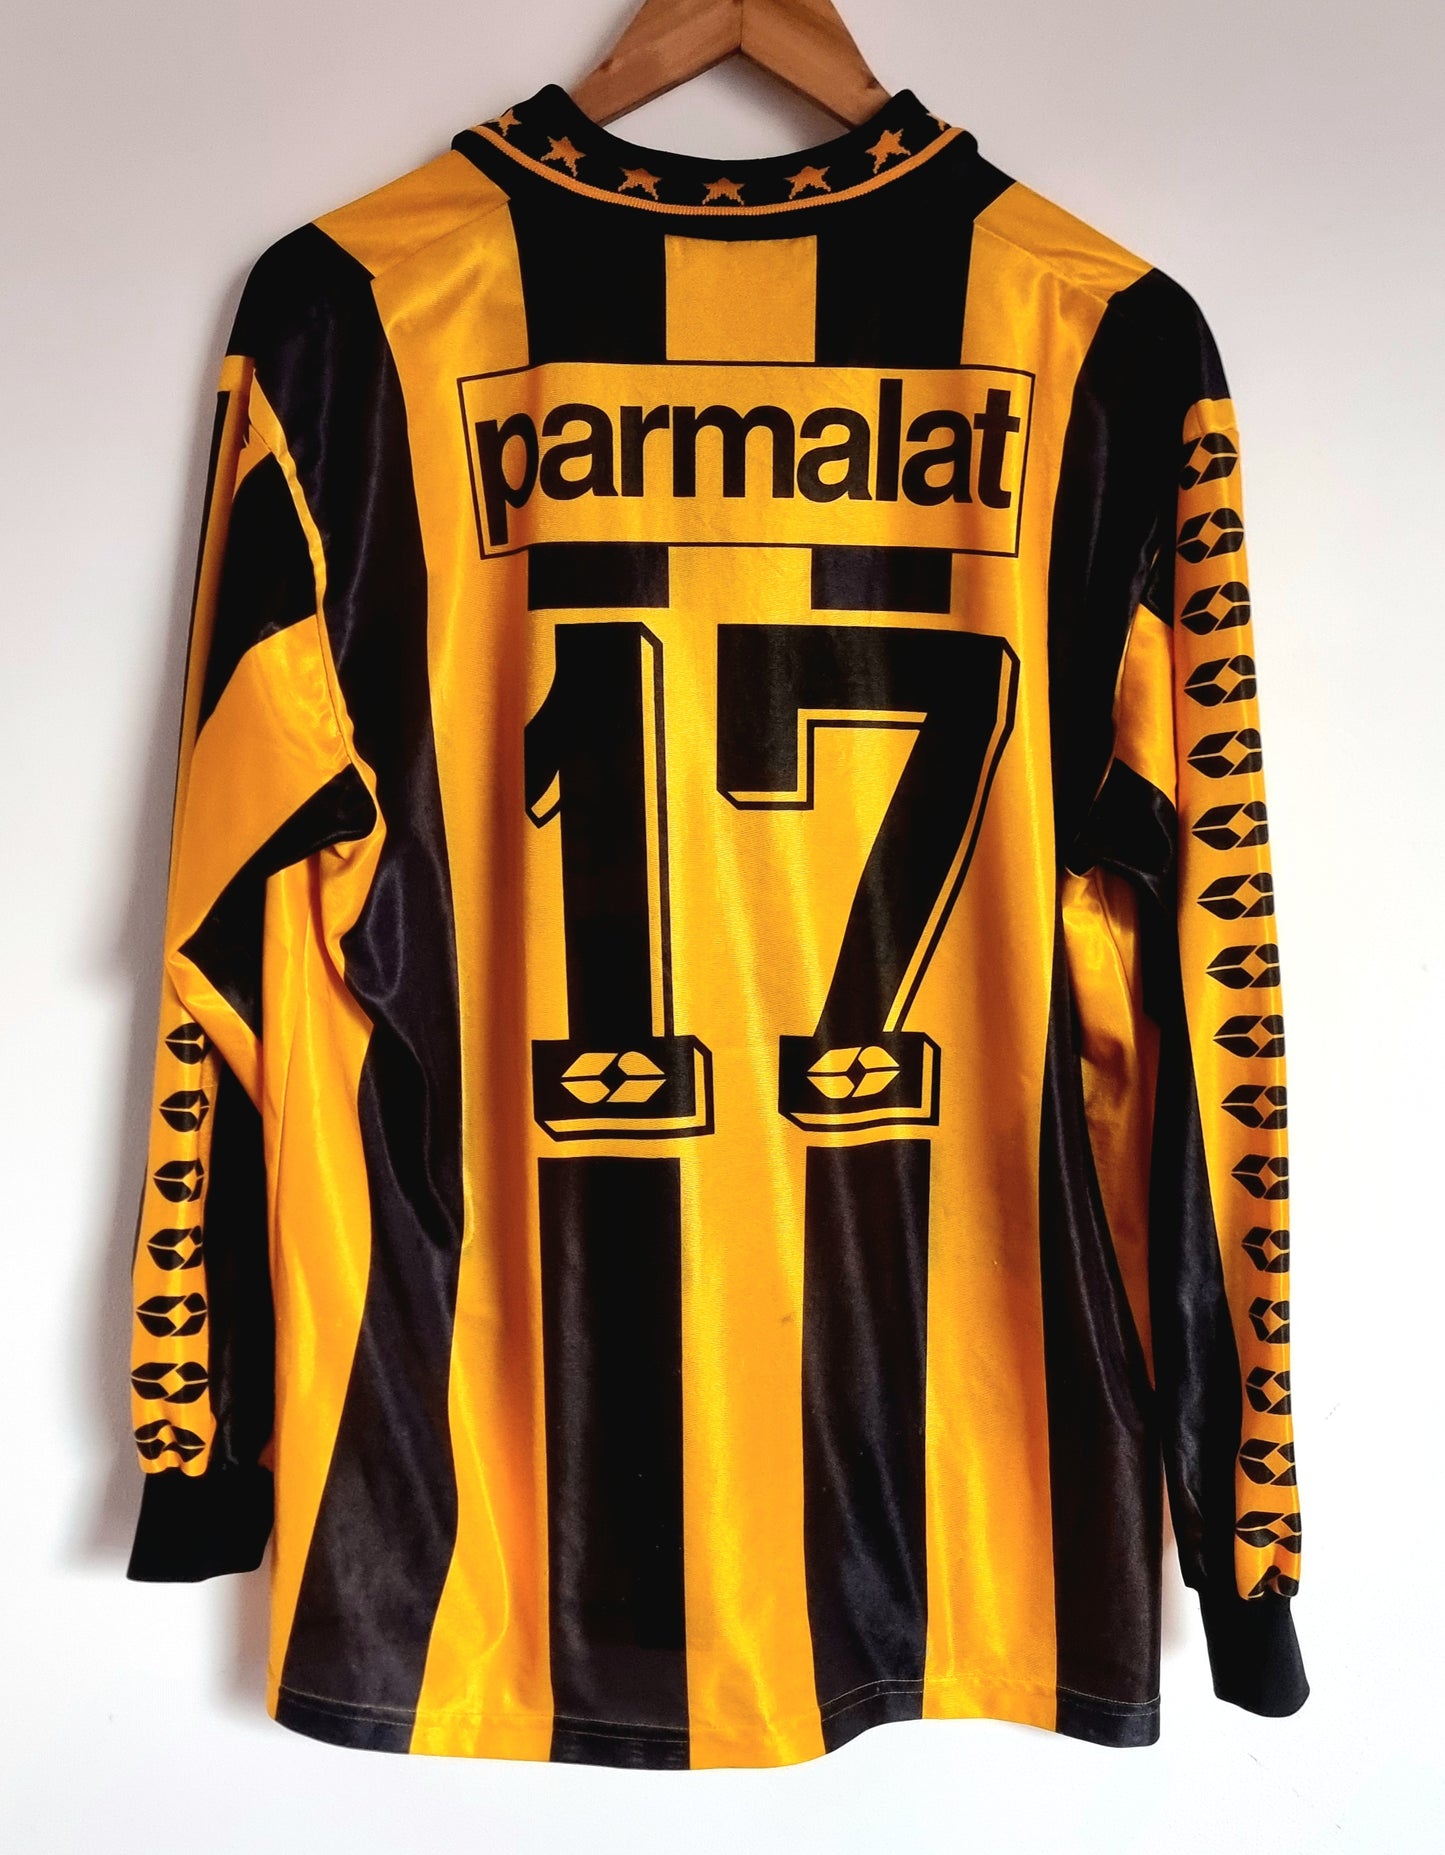 Nanque Penarol 94/95 Player Issue Long Sleeve Home XL